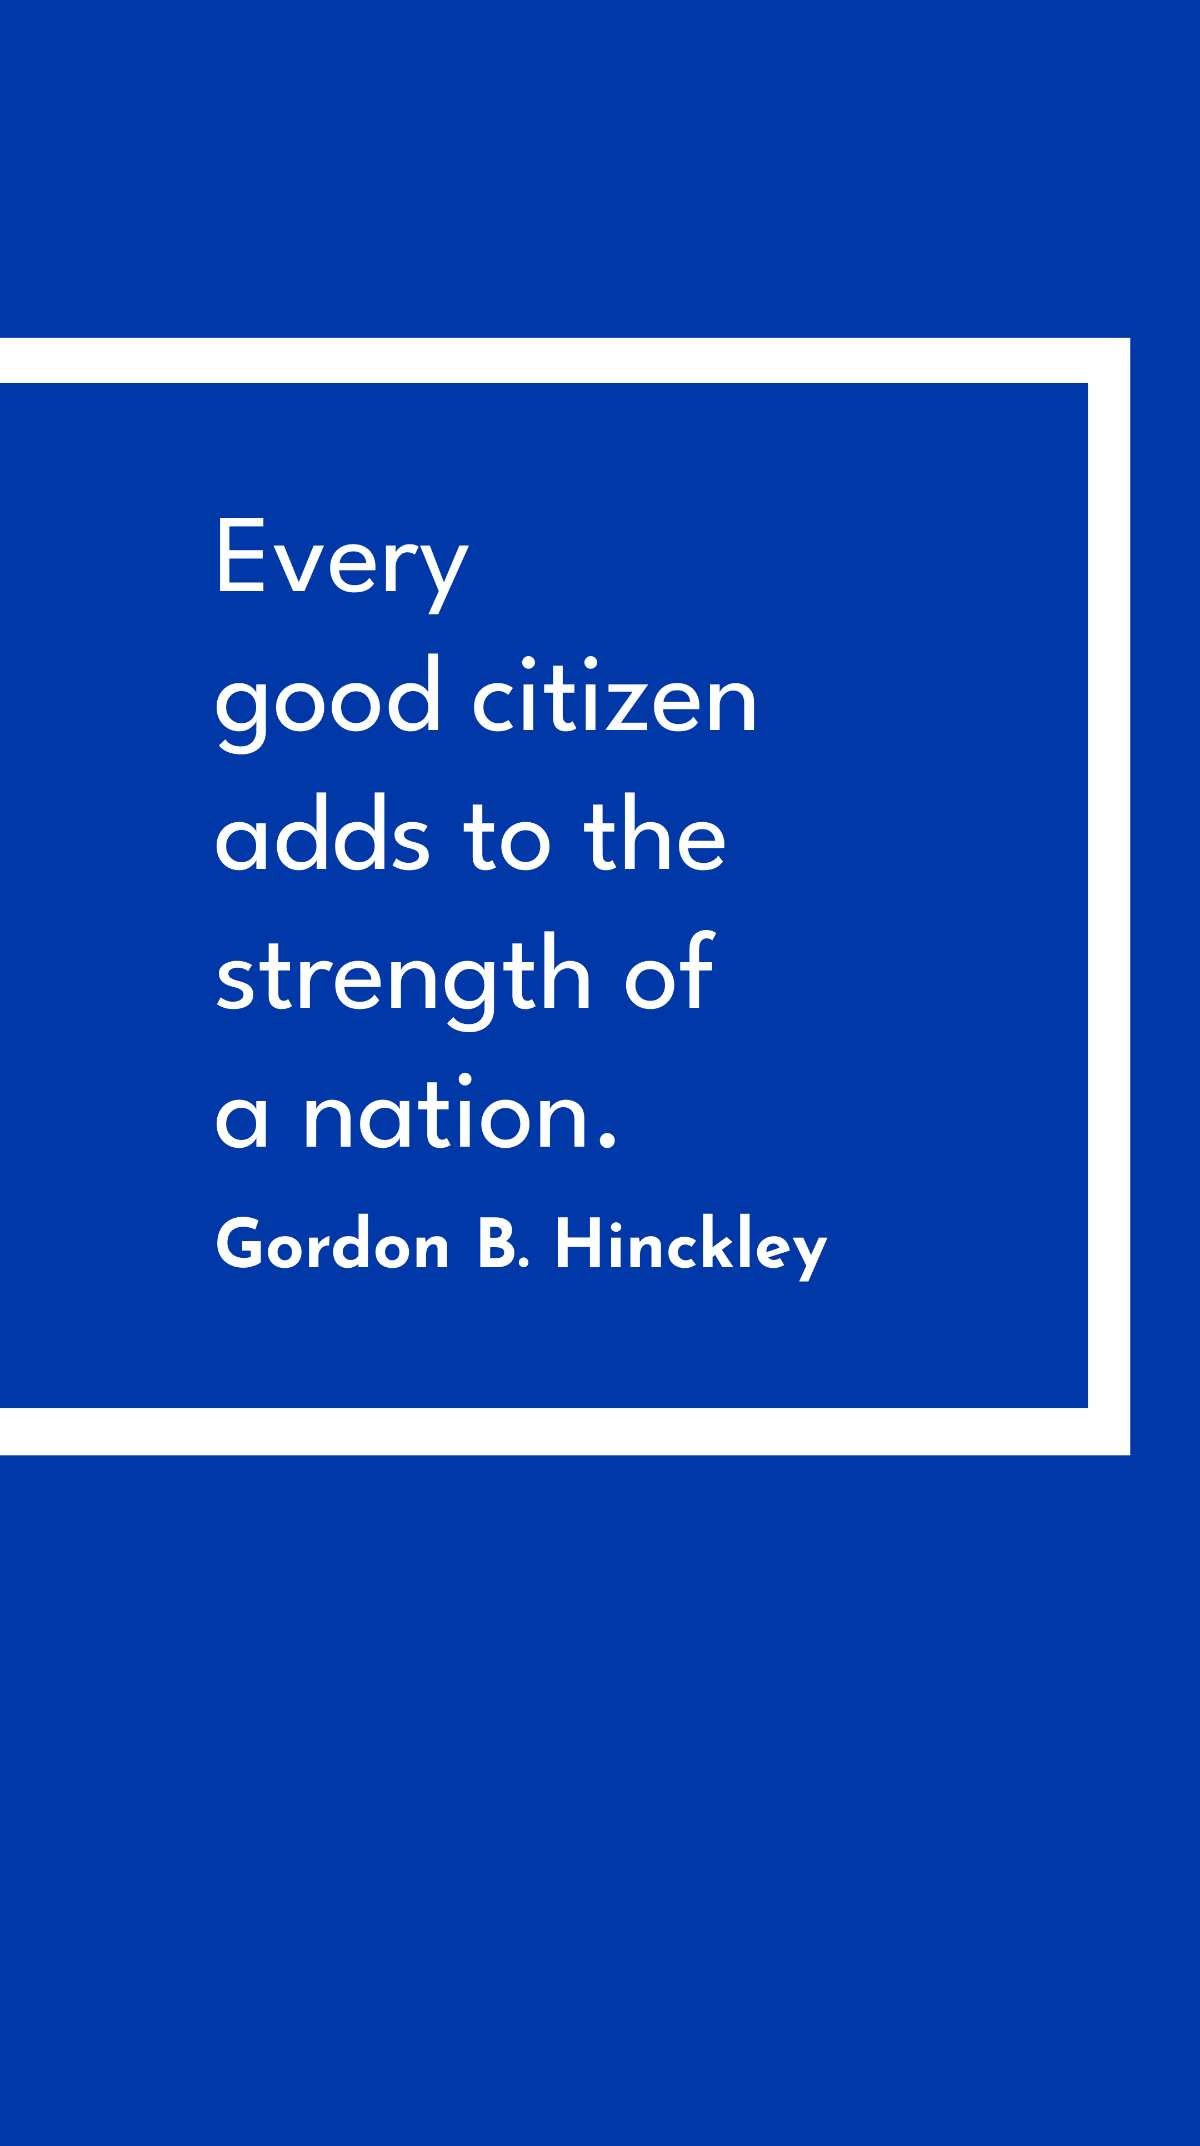 Gordon B. Hinckley - Every good citizen adds to the strength of a nation. Template